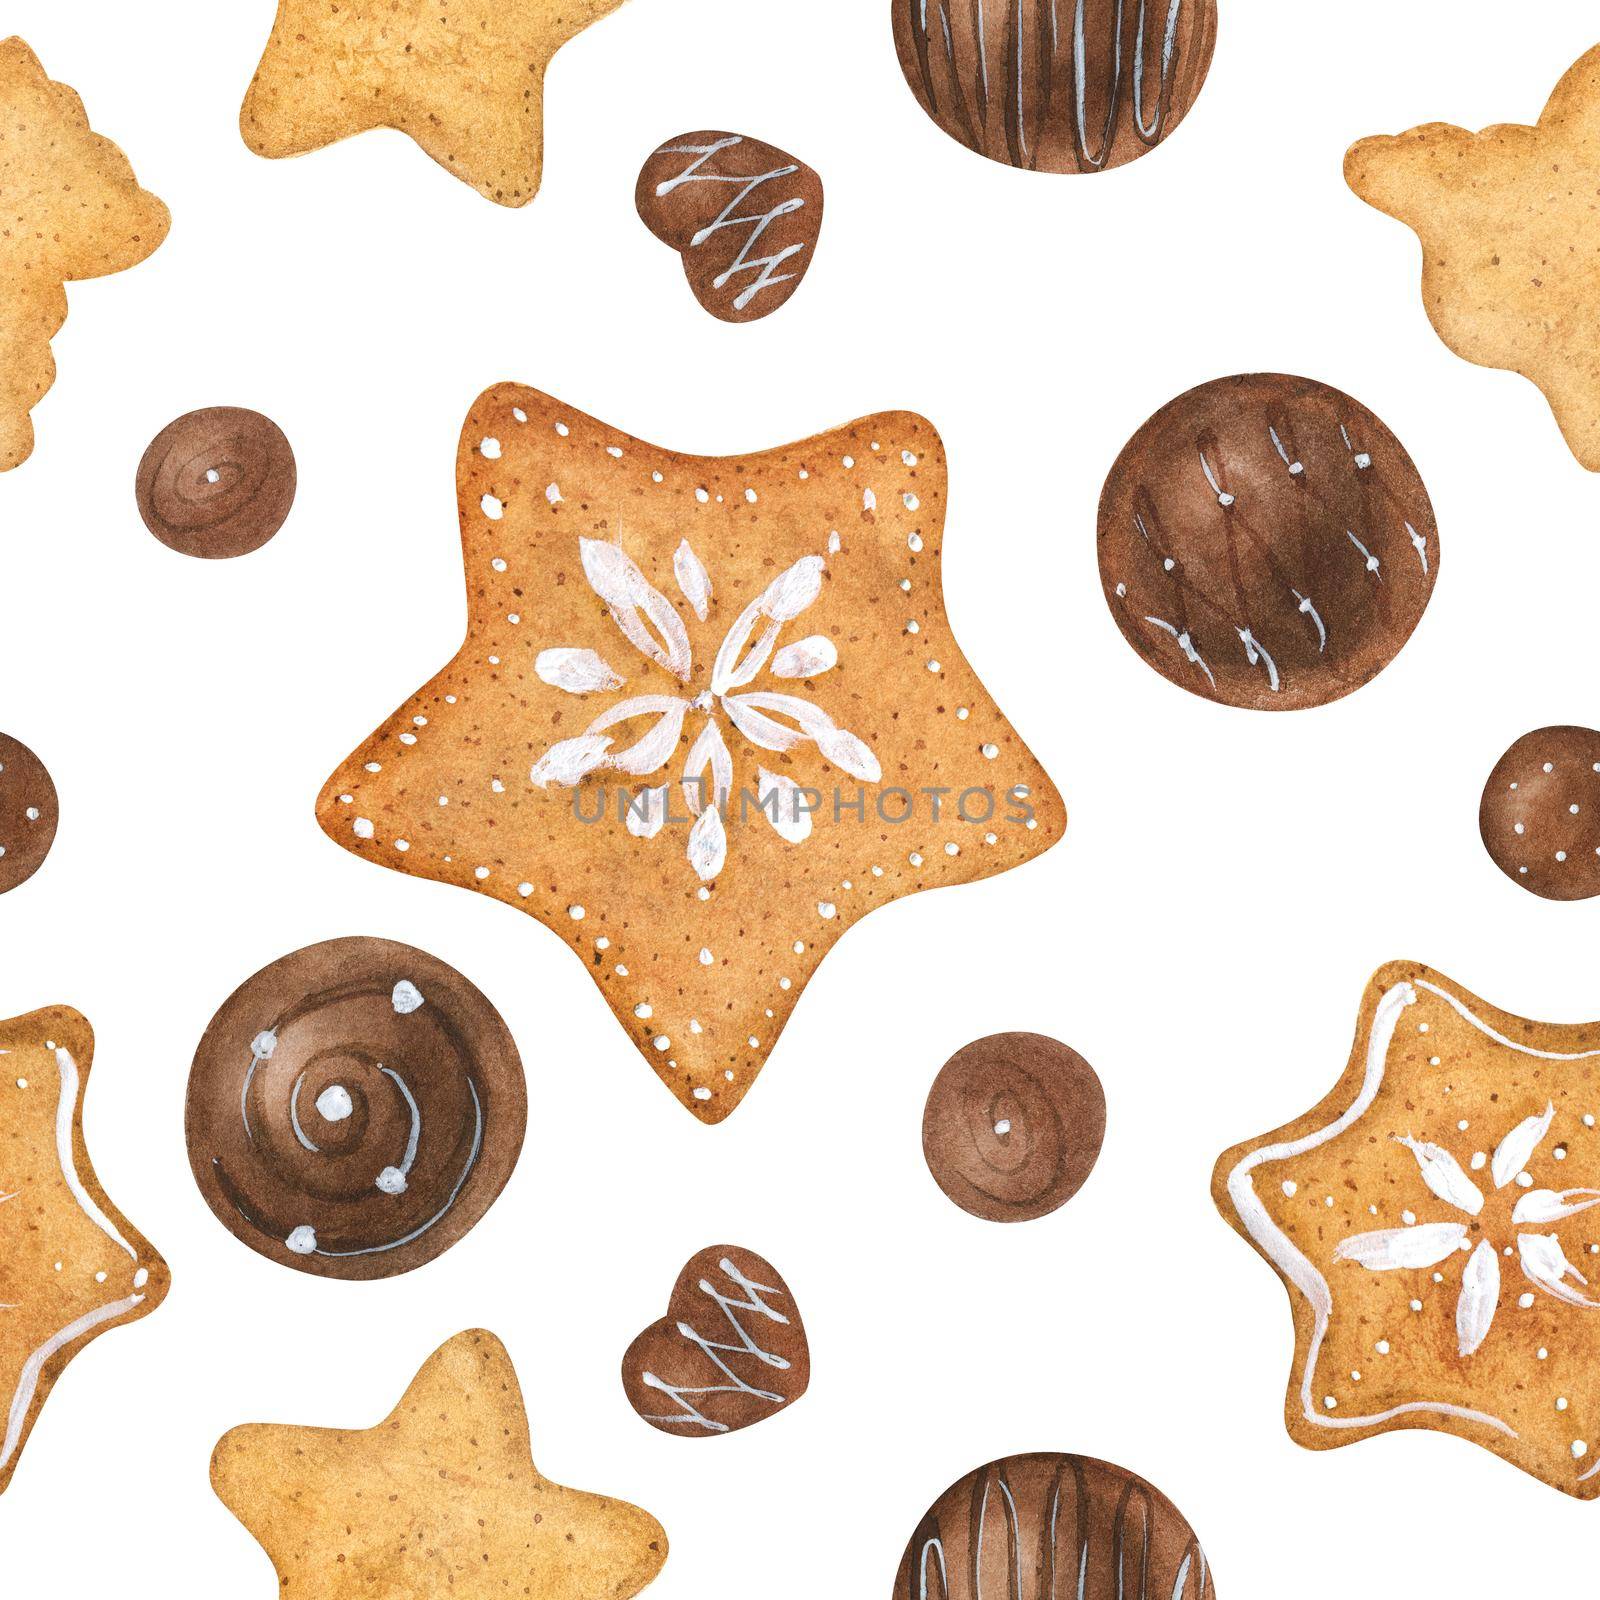 Sweet winter pattern with chocolates and cookies by Xeniasnowstorm